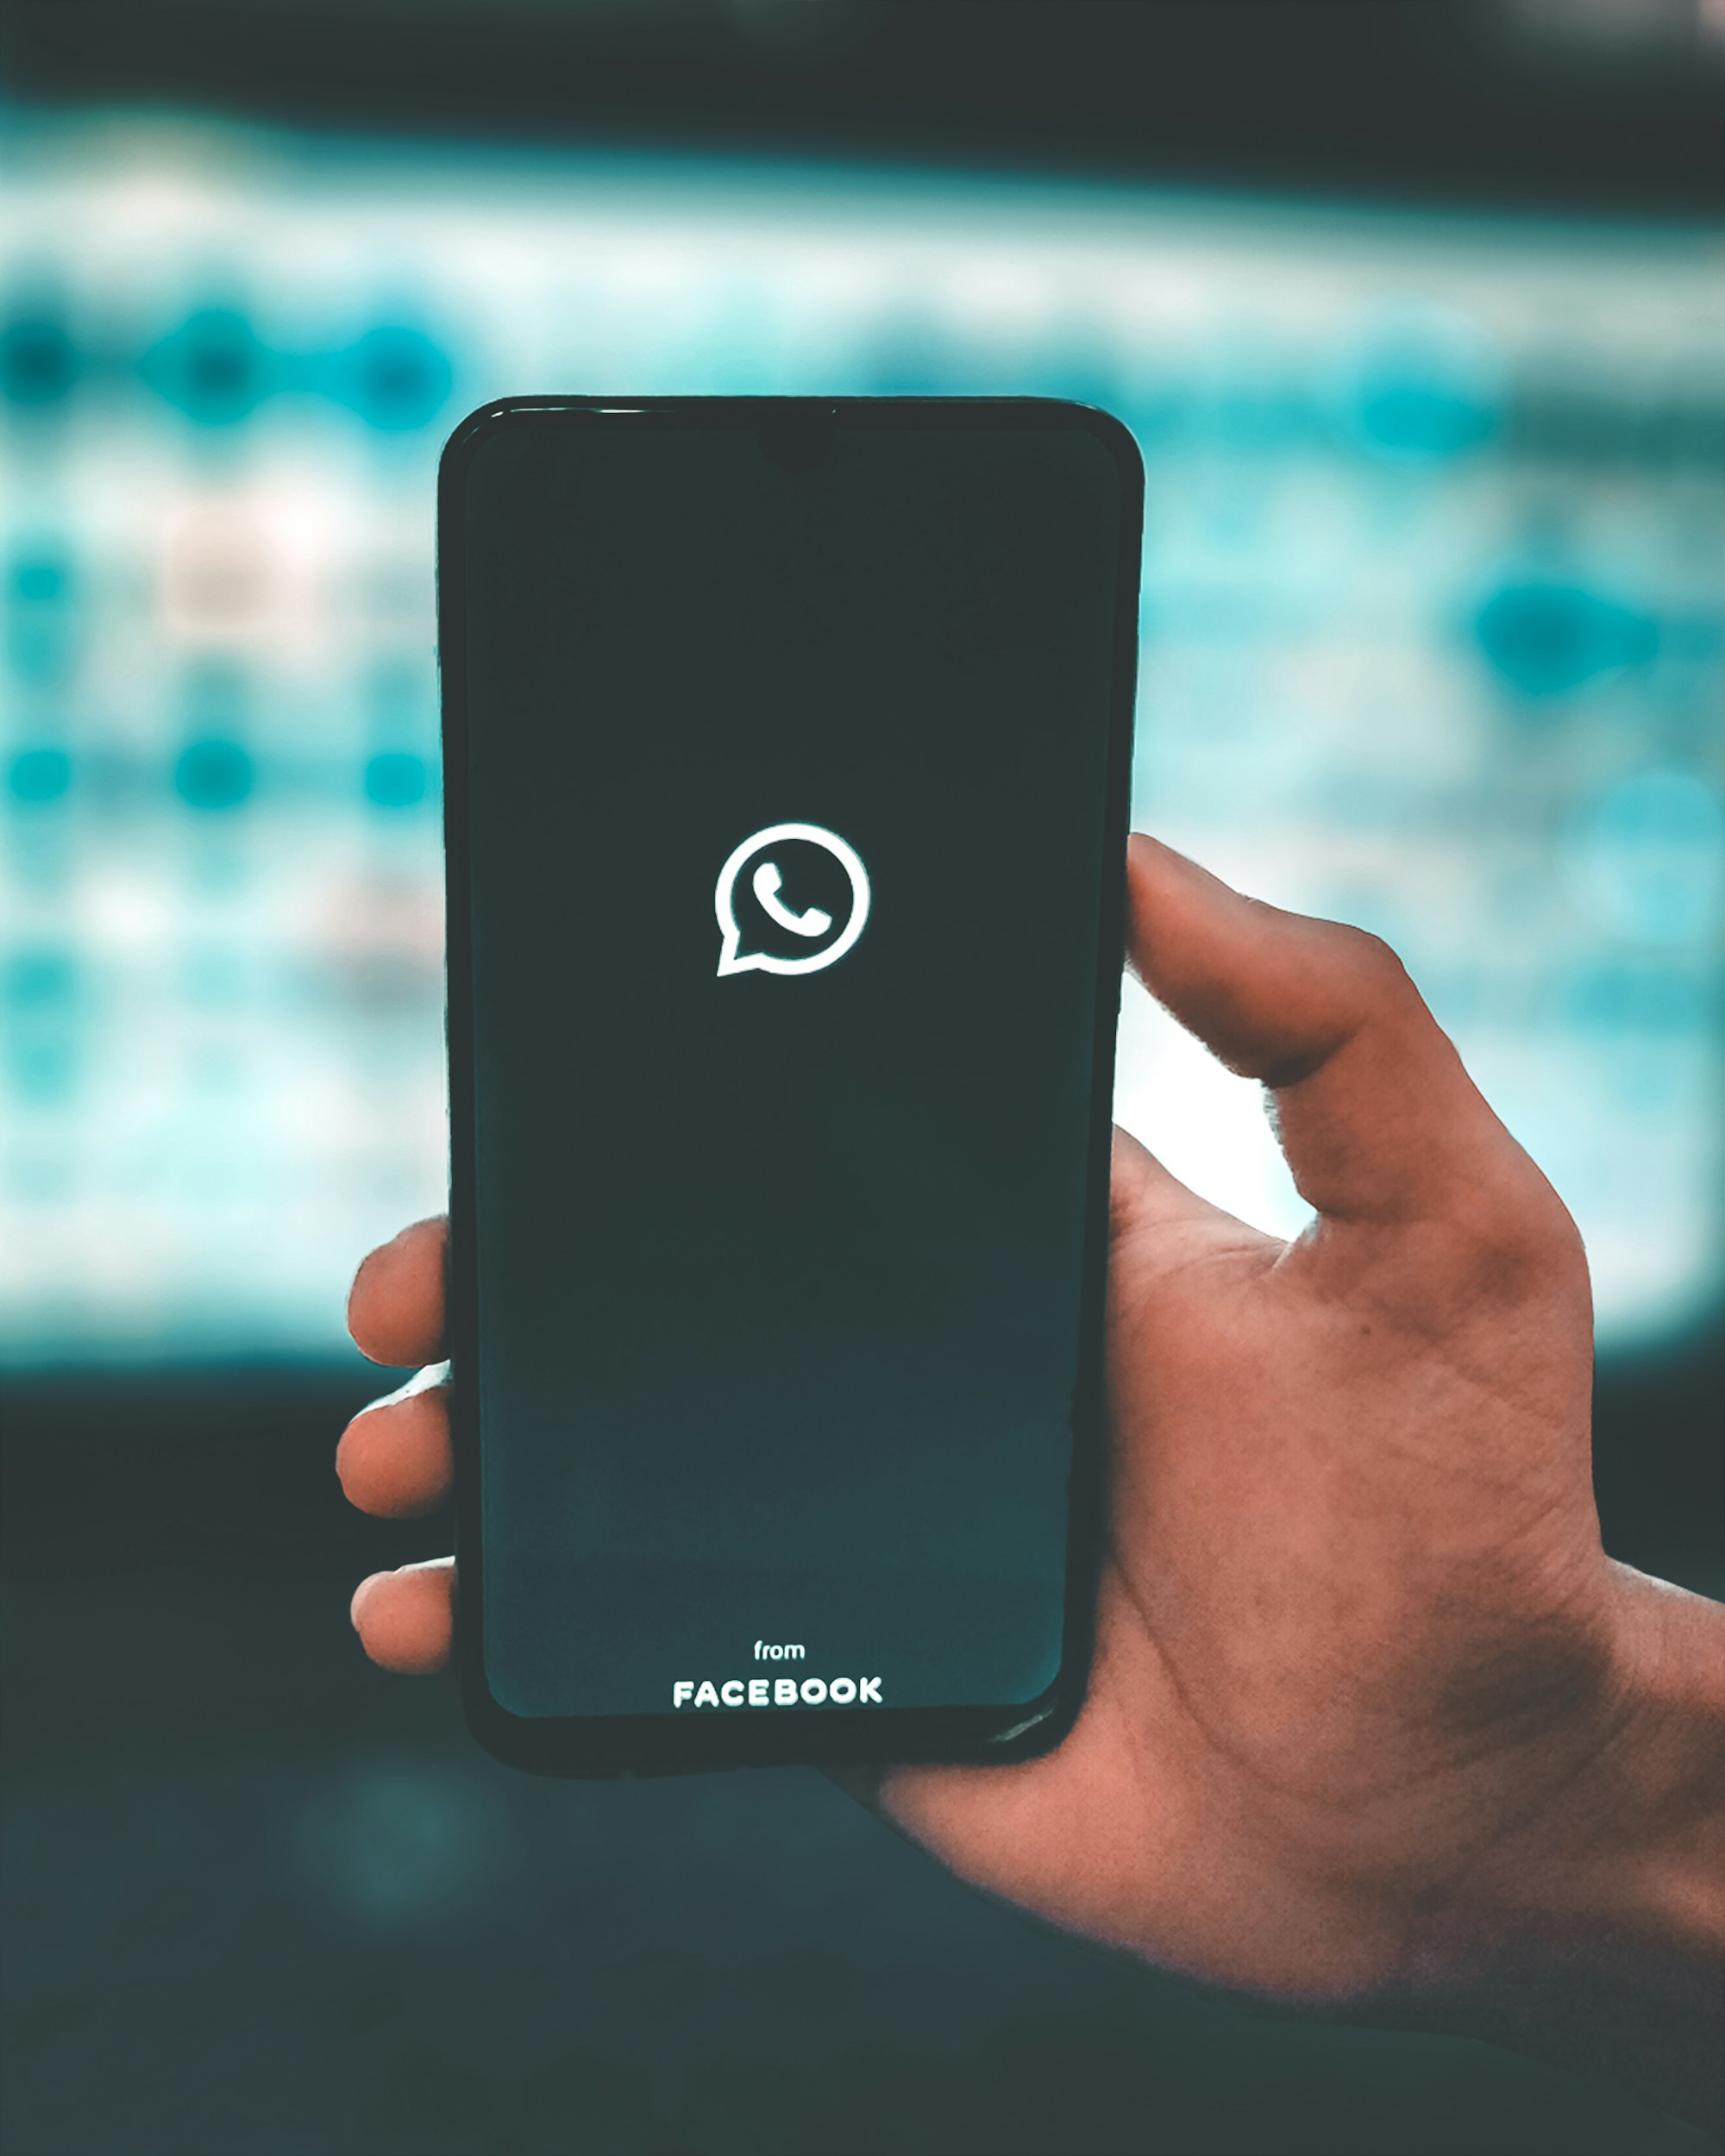 is WhatsApp respecting your privacy?